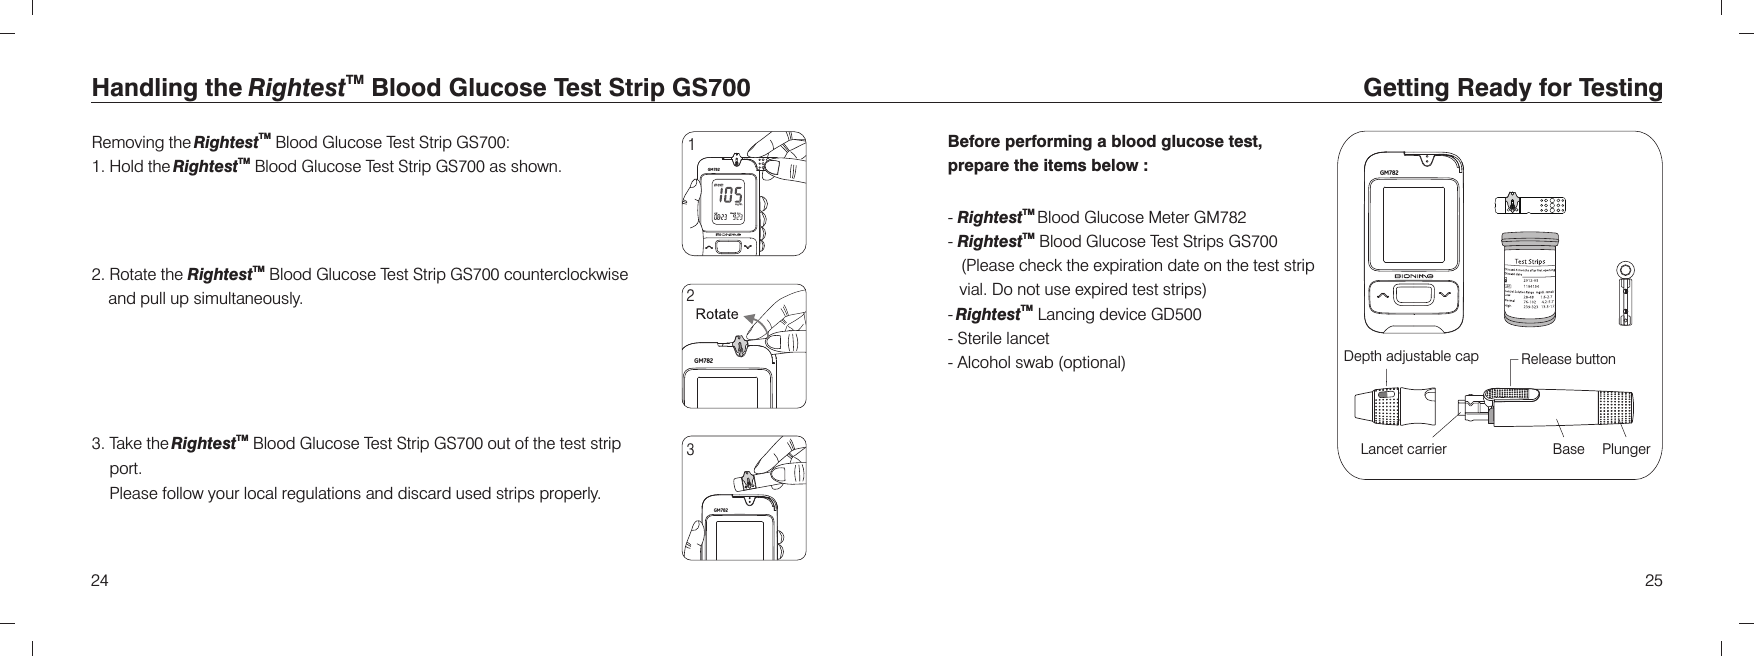 GM7822524Handling the Blood Glucose Test Strip TMRightest  GS700 Removing the  Blood Glucose Test Strip :1. Hold the  Blood Glucose Test Strip  as shown.2. Rotate the   Blood Glucose Test Strip  counterclockwise and pull up simultaneously.TMRightestTMRightestTMRightest GS700 GS700 GS7003. Take the  Blood Glucose Test Strip  out of the test strip port.Please follow your local regulations and discard used strips properly.TMRightest  GS700123Getting Ready for TestingBefore performing a blood glucose test, prepare the items below :-   Blood Glucose Meter-   Blood Glucose Test Strips     (Please check the expiration date on the test strip vial. Do not use expired test strips)- Lancing device GD500- Sterile lancet- Alcohol swab (optional)TMRightestTMRightestTMRightest GM782 GS700 PlungerBaseLancet carrierRelease buttonDepth adjustable capGM782GM782GM782